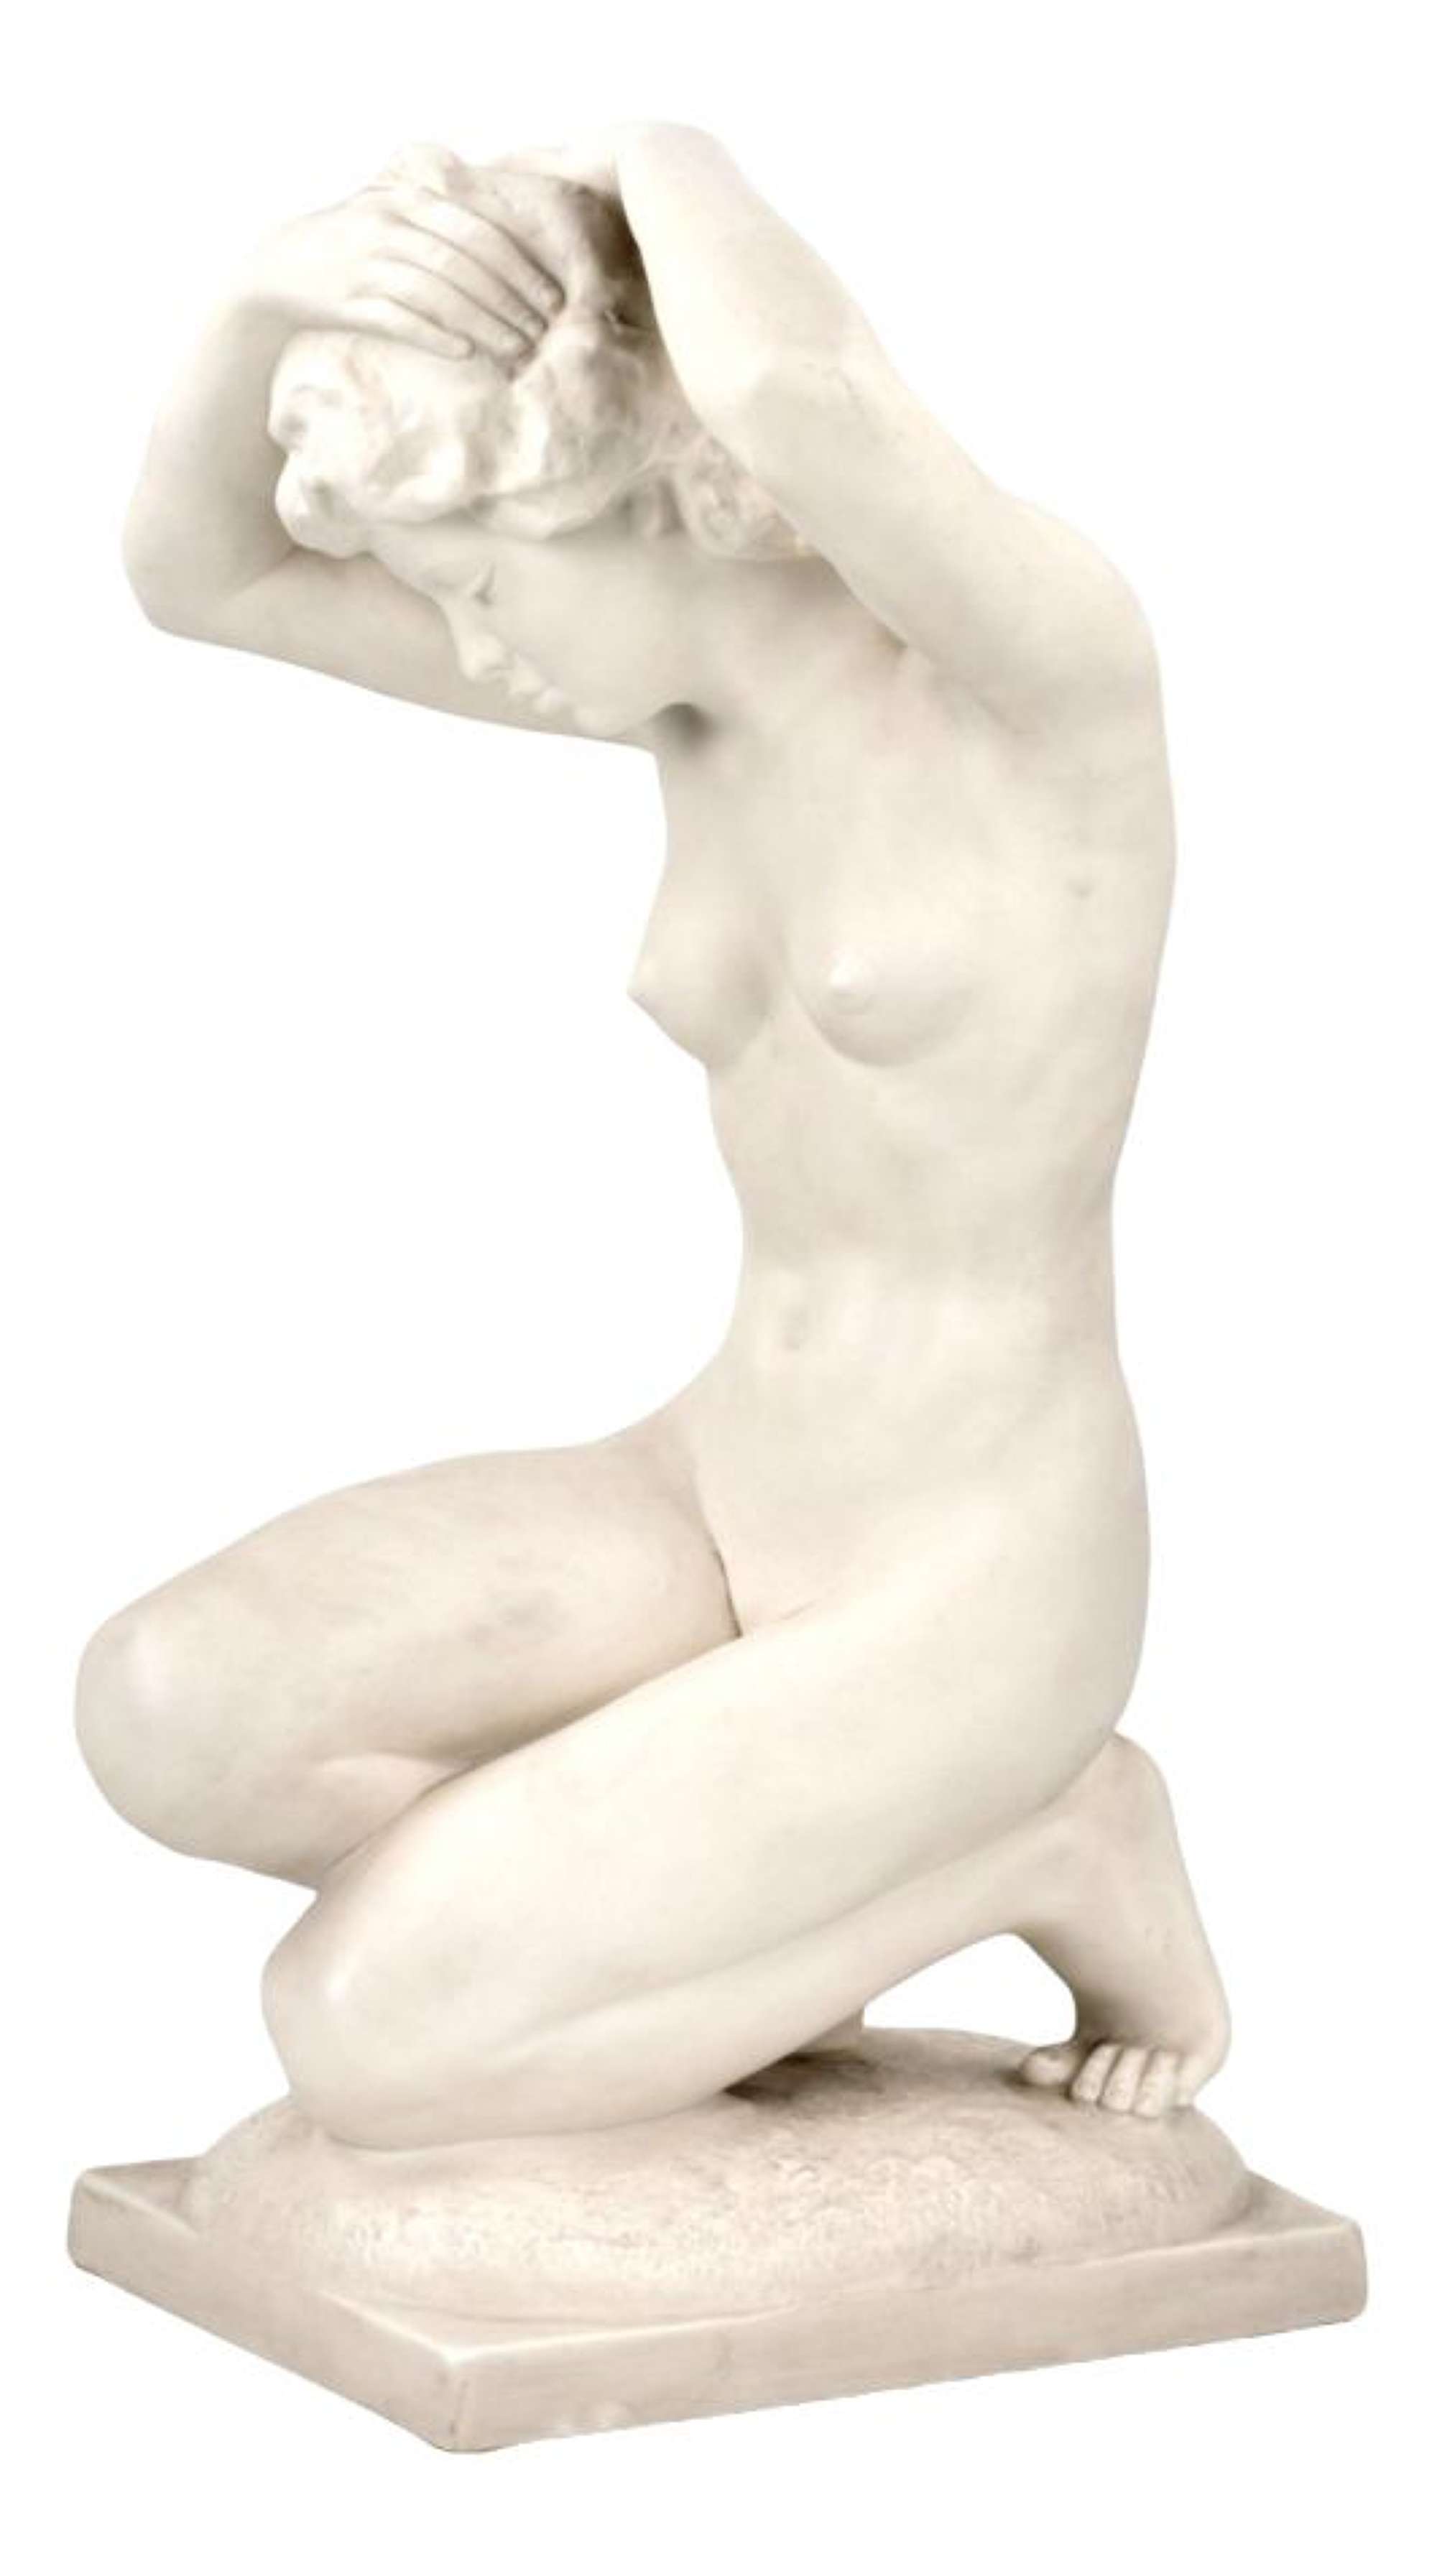 After the Bath Figure from Hutschenreuther